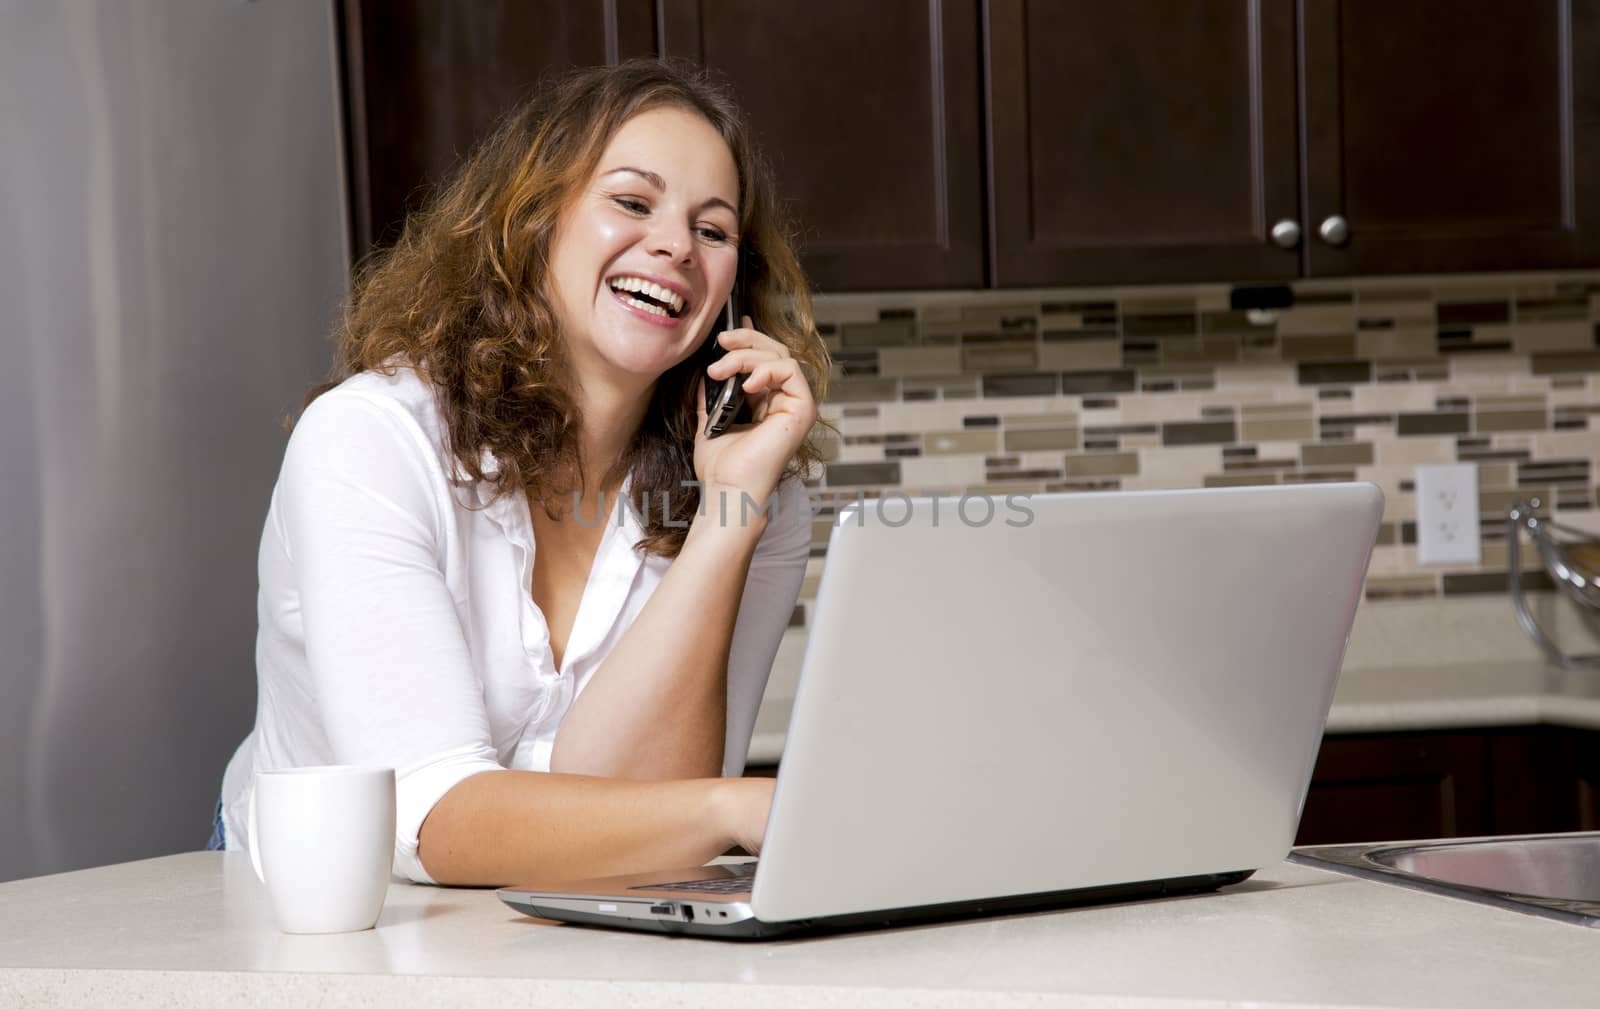 woman drinking coffee while chatting on the phone, using laptop